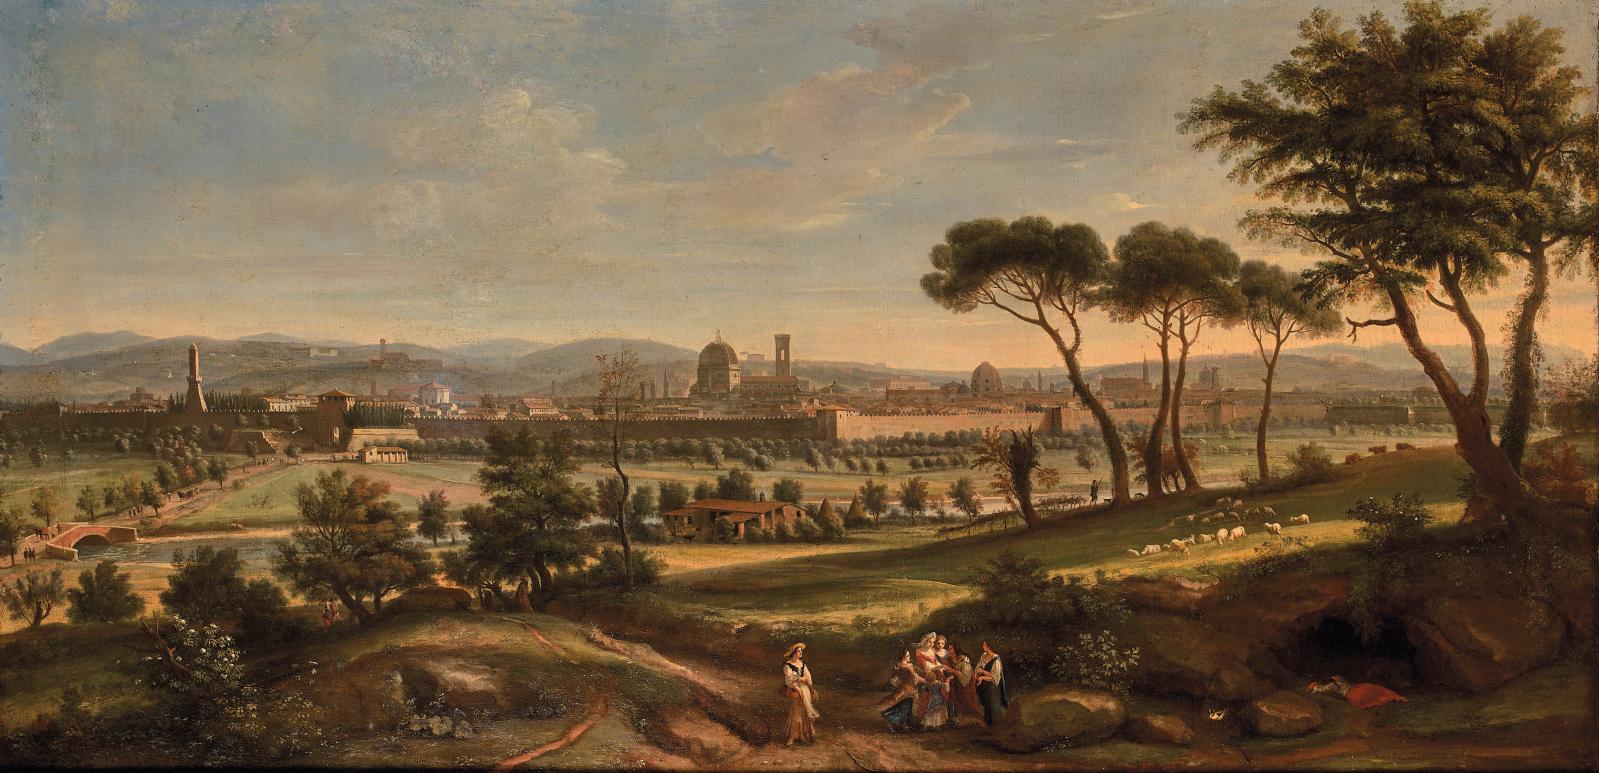 Florence in the Late 17th Century as Seen by Gaspard Van Wittel